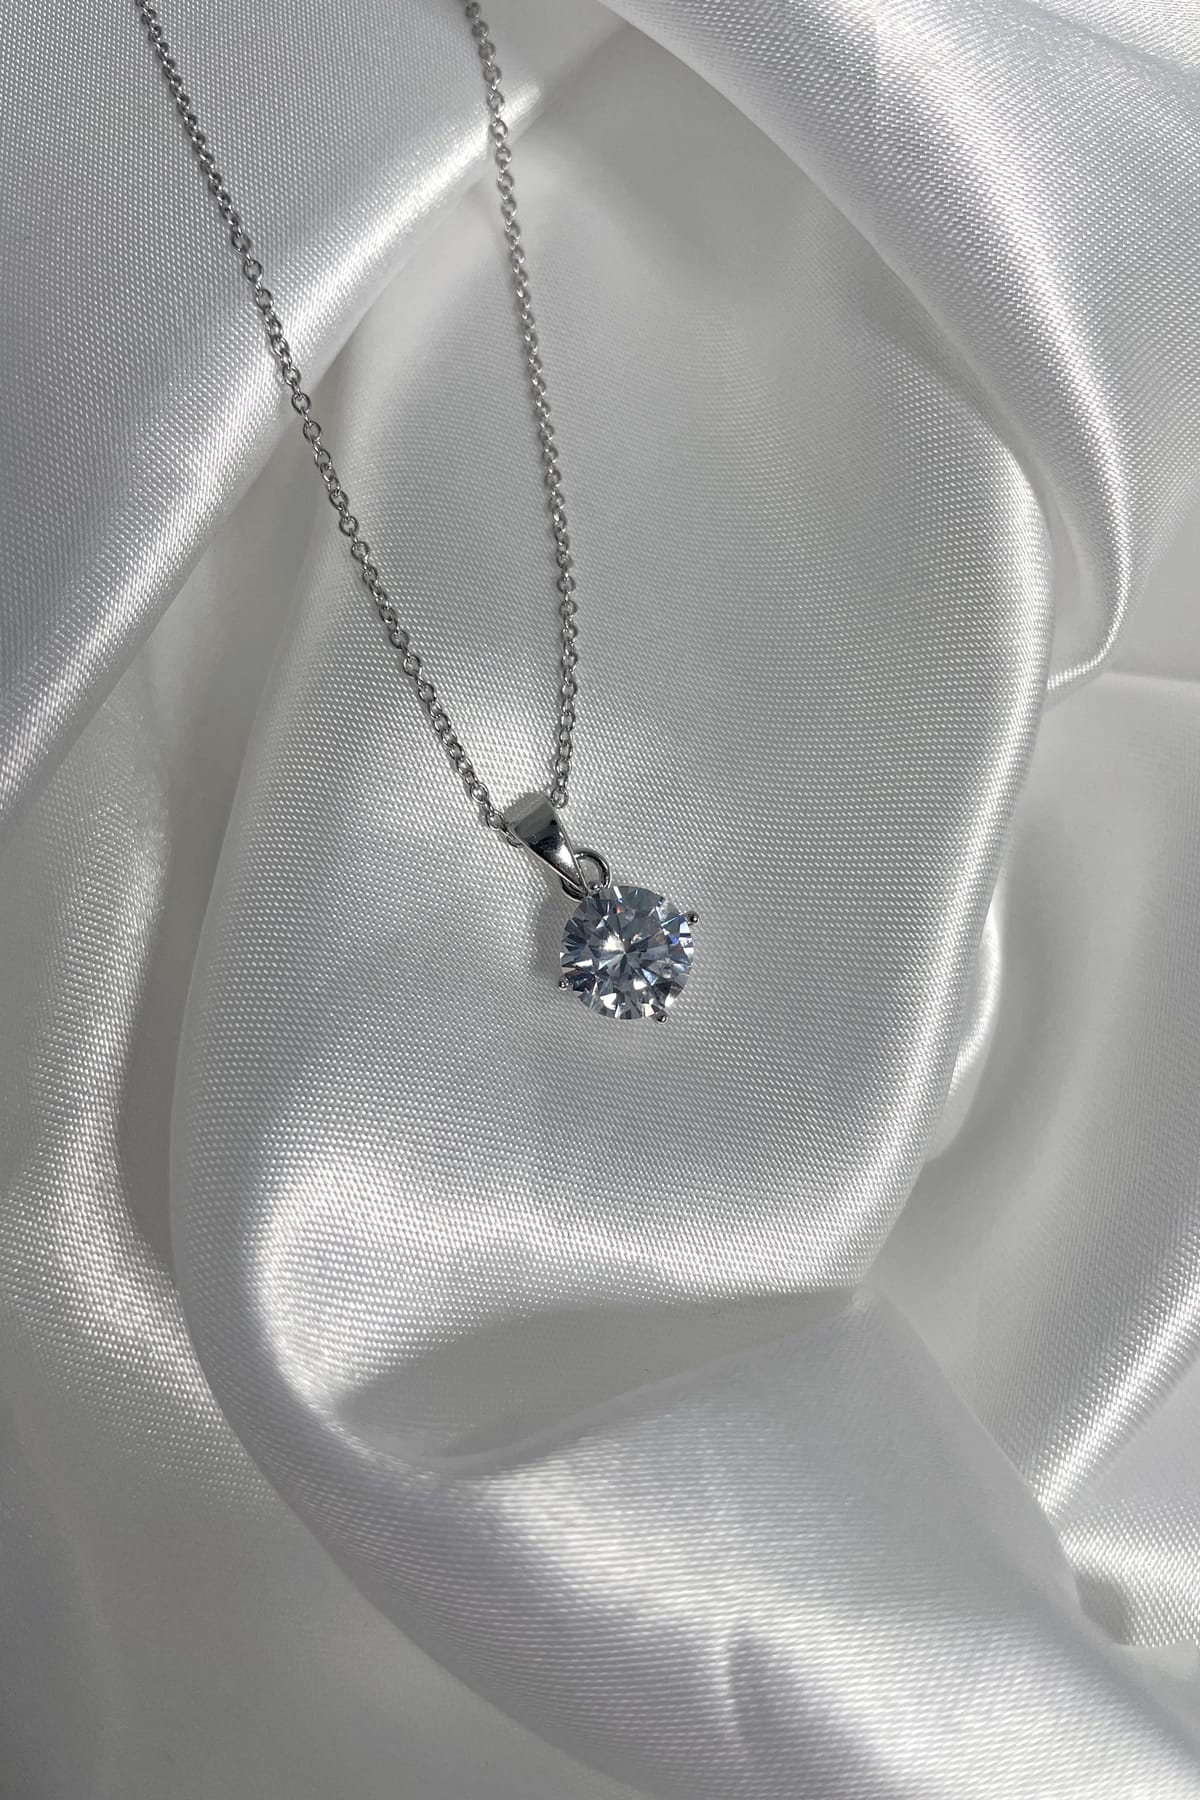 Sterling Silver 8mm 4 Claw Round Cubic Zirconia Pendant with Chain available at LeGassick Diamonds and Jewellery Gold Coast, Australia.